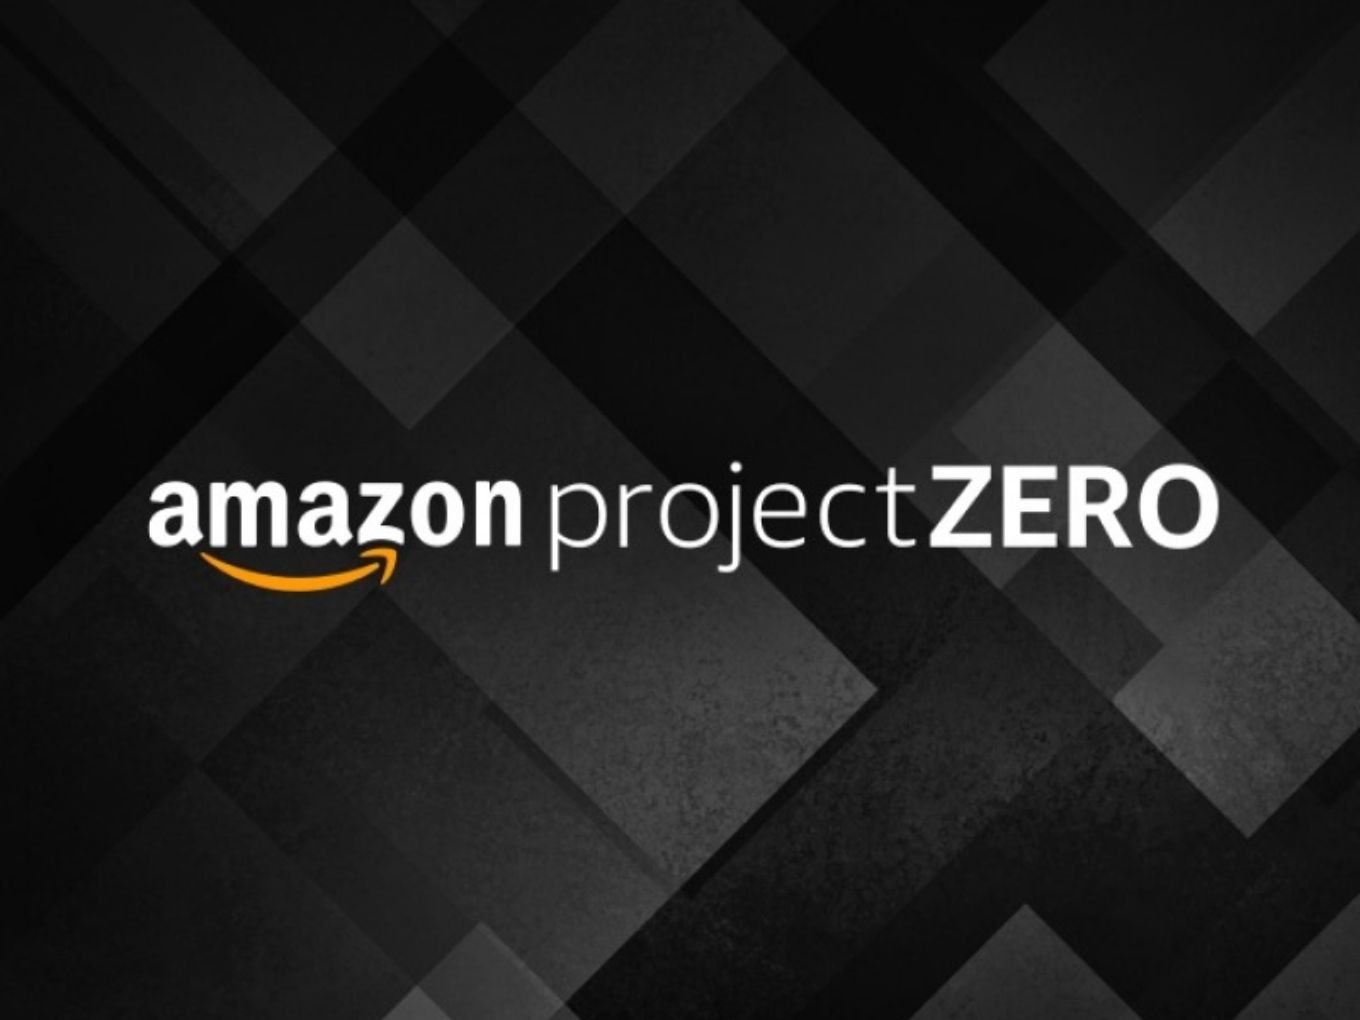 Amazon Says Goodbye To Counterfeit Products With Project Zero